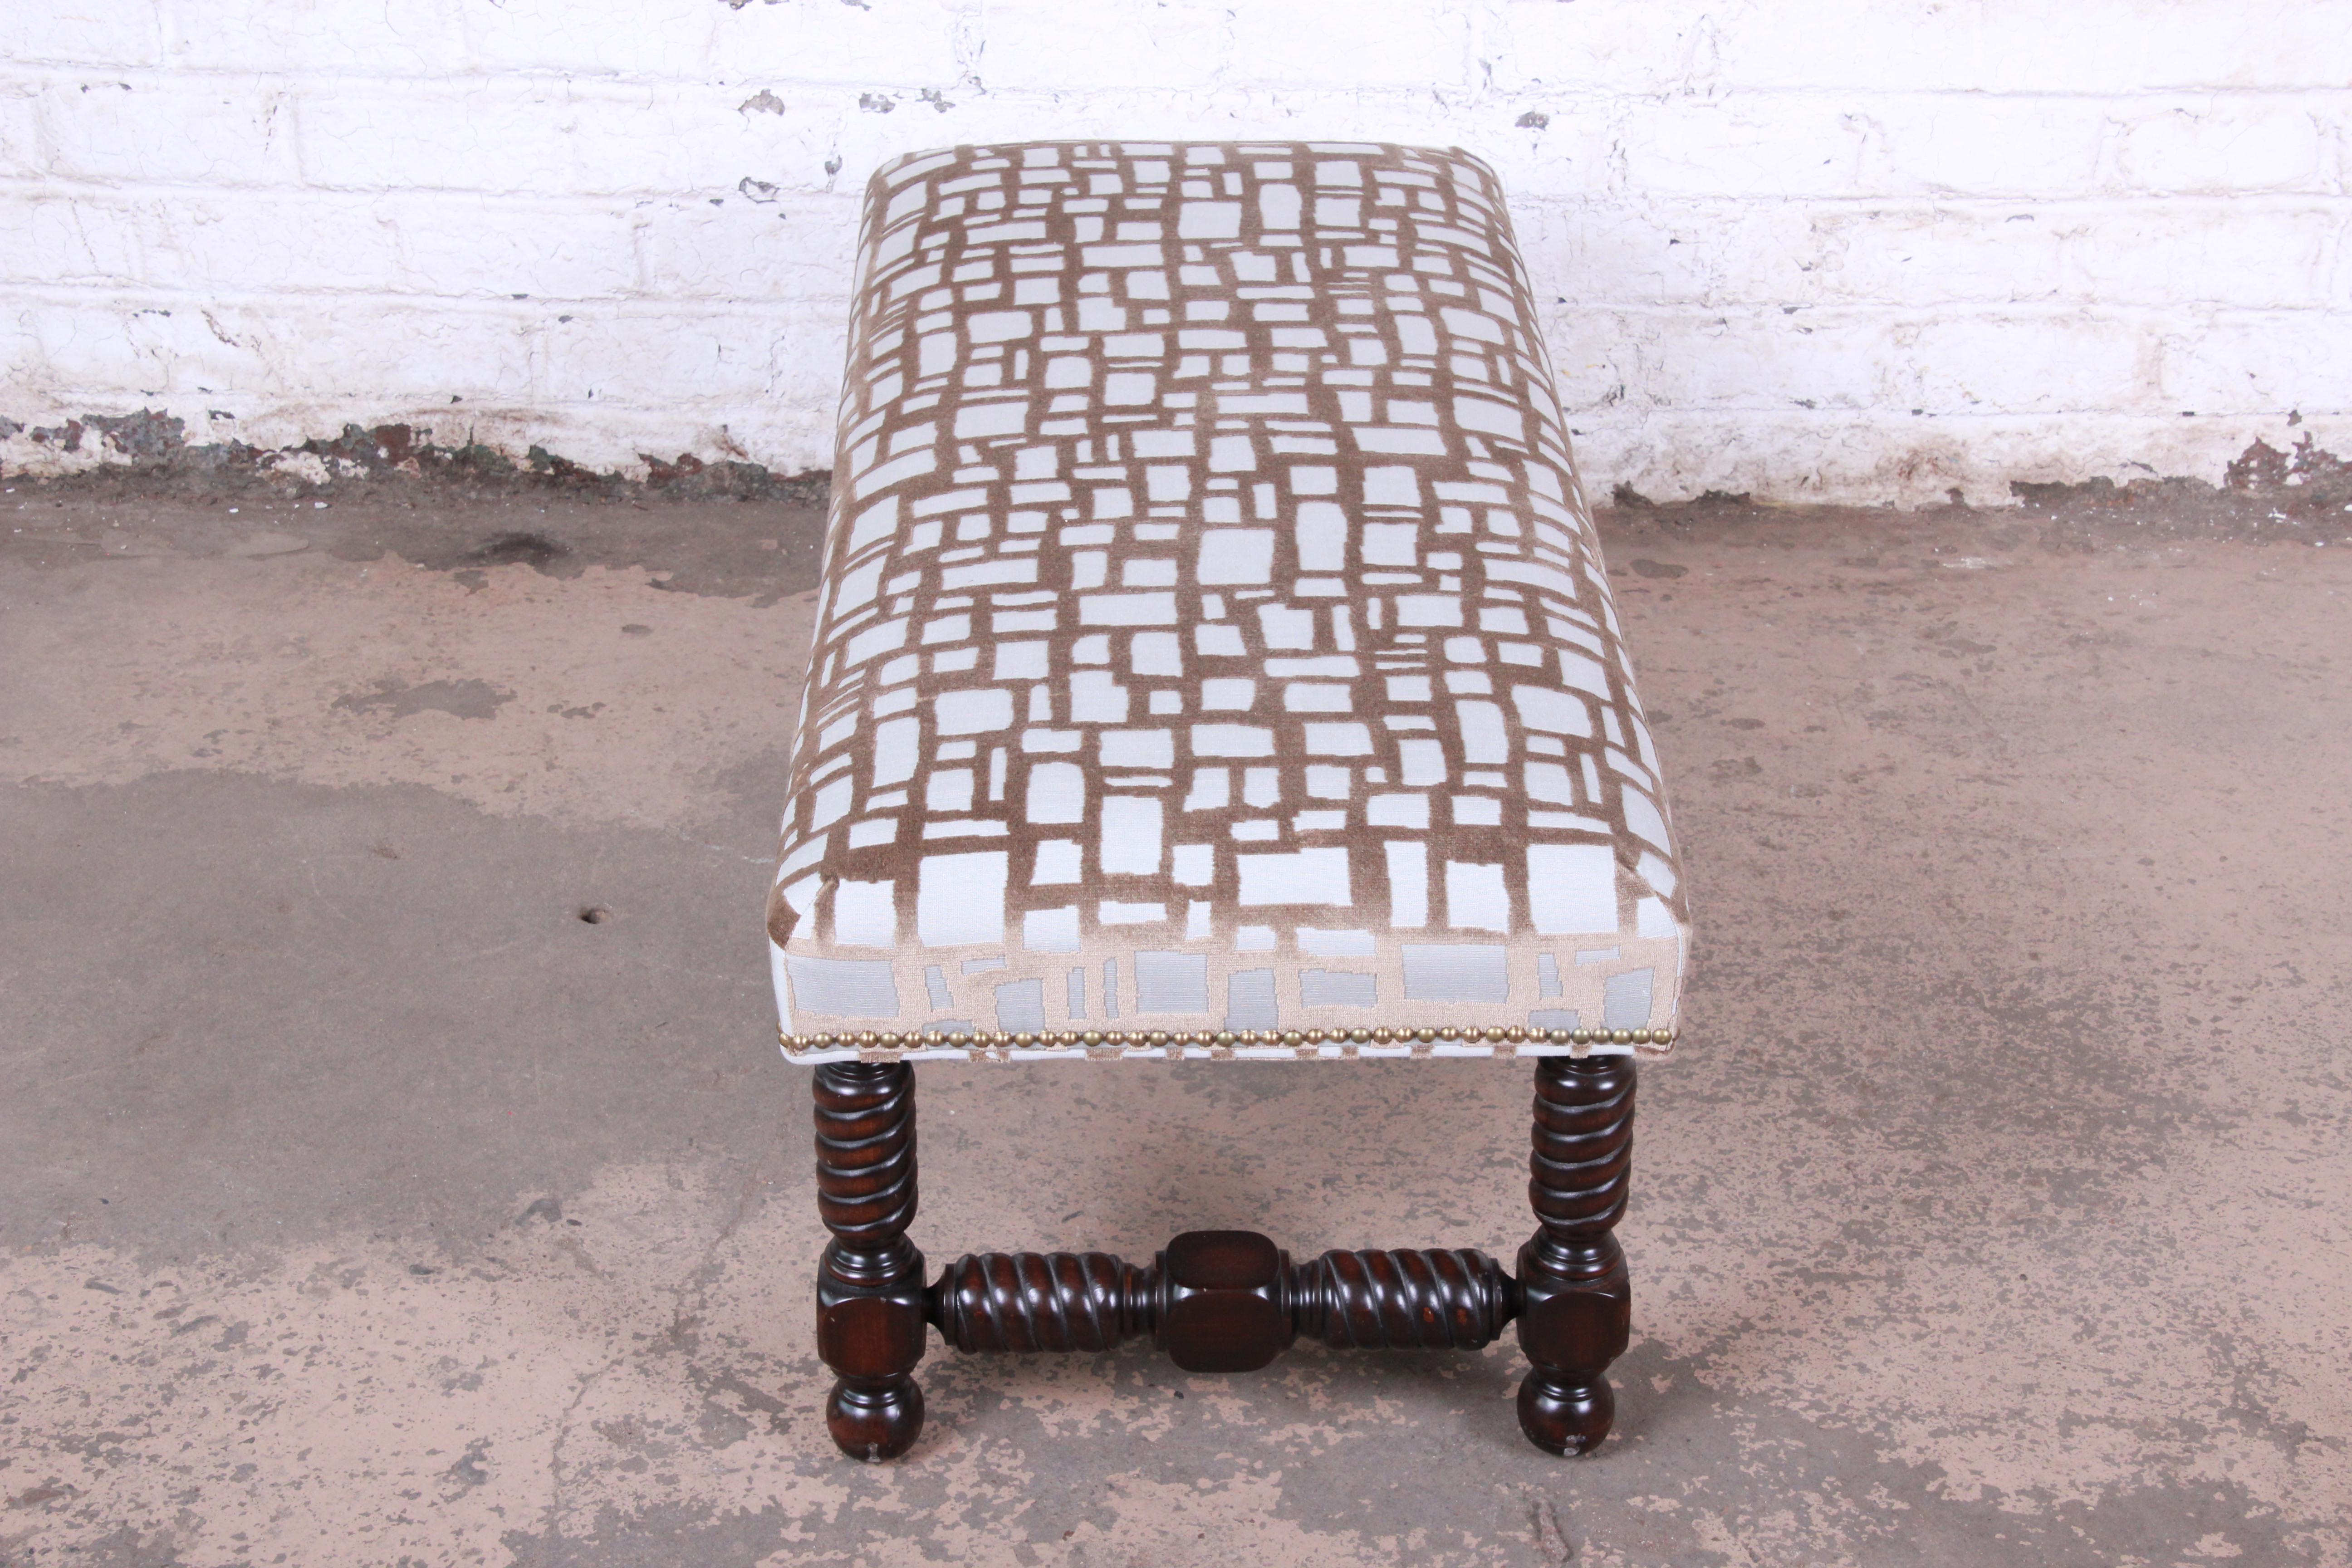 Upholstery Contemporary Transitional Jacobean Revival Walnut Upholstered Bench